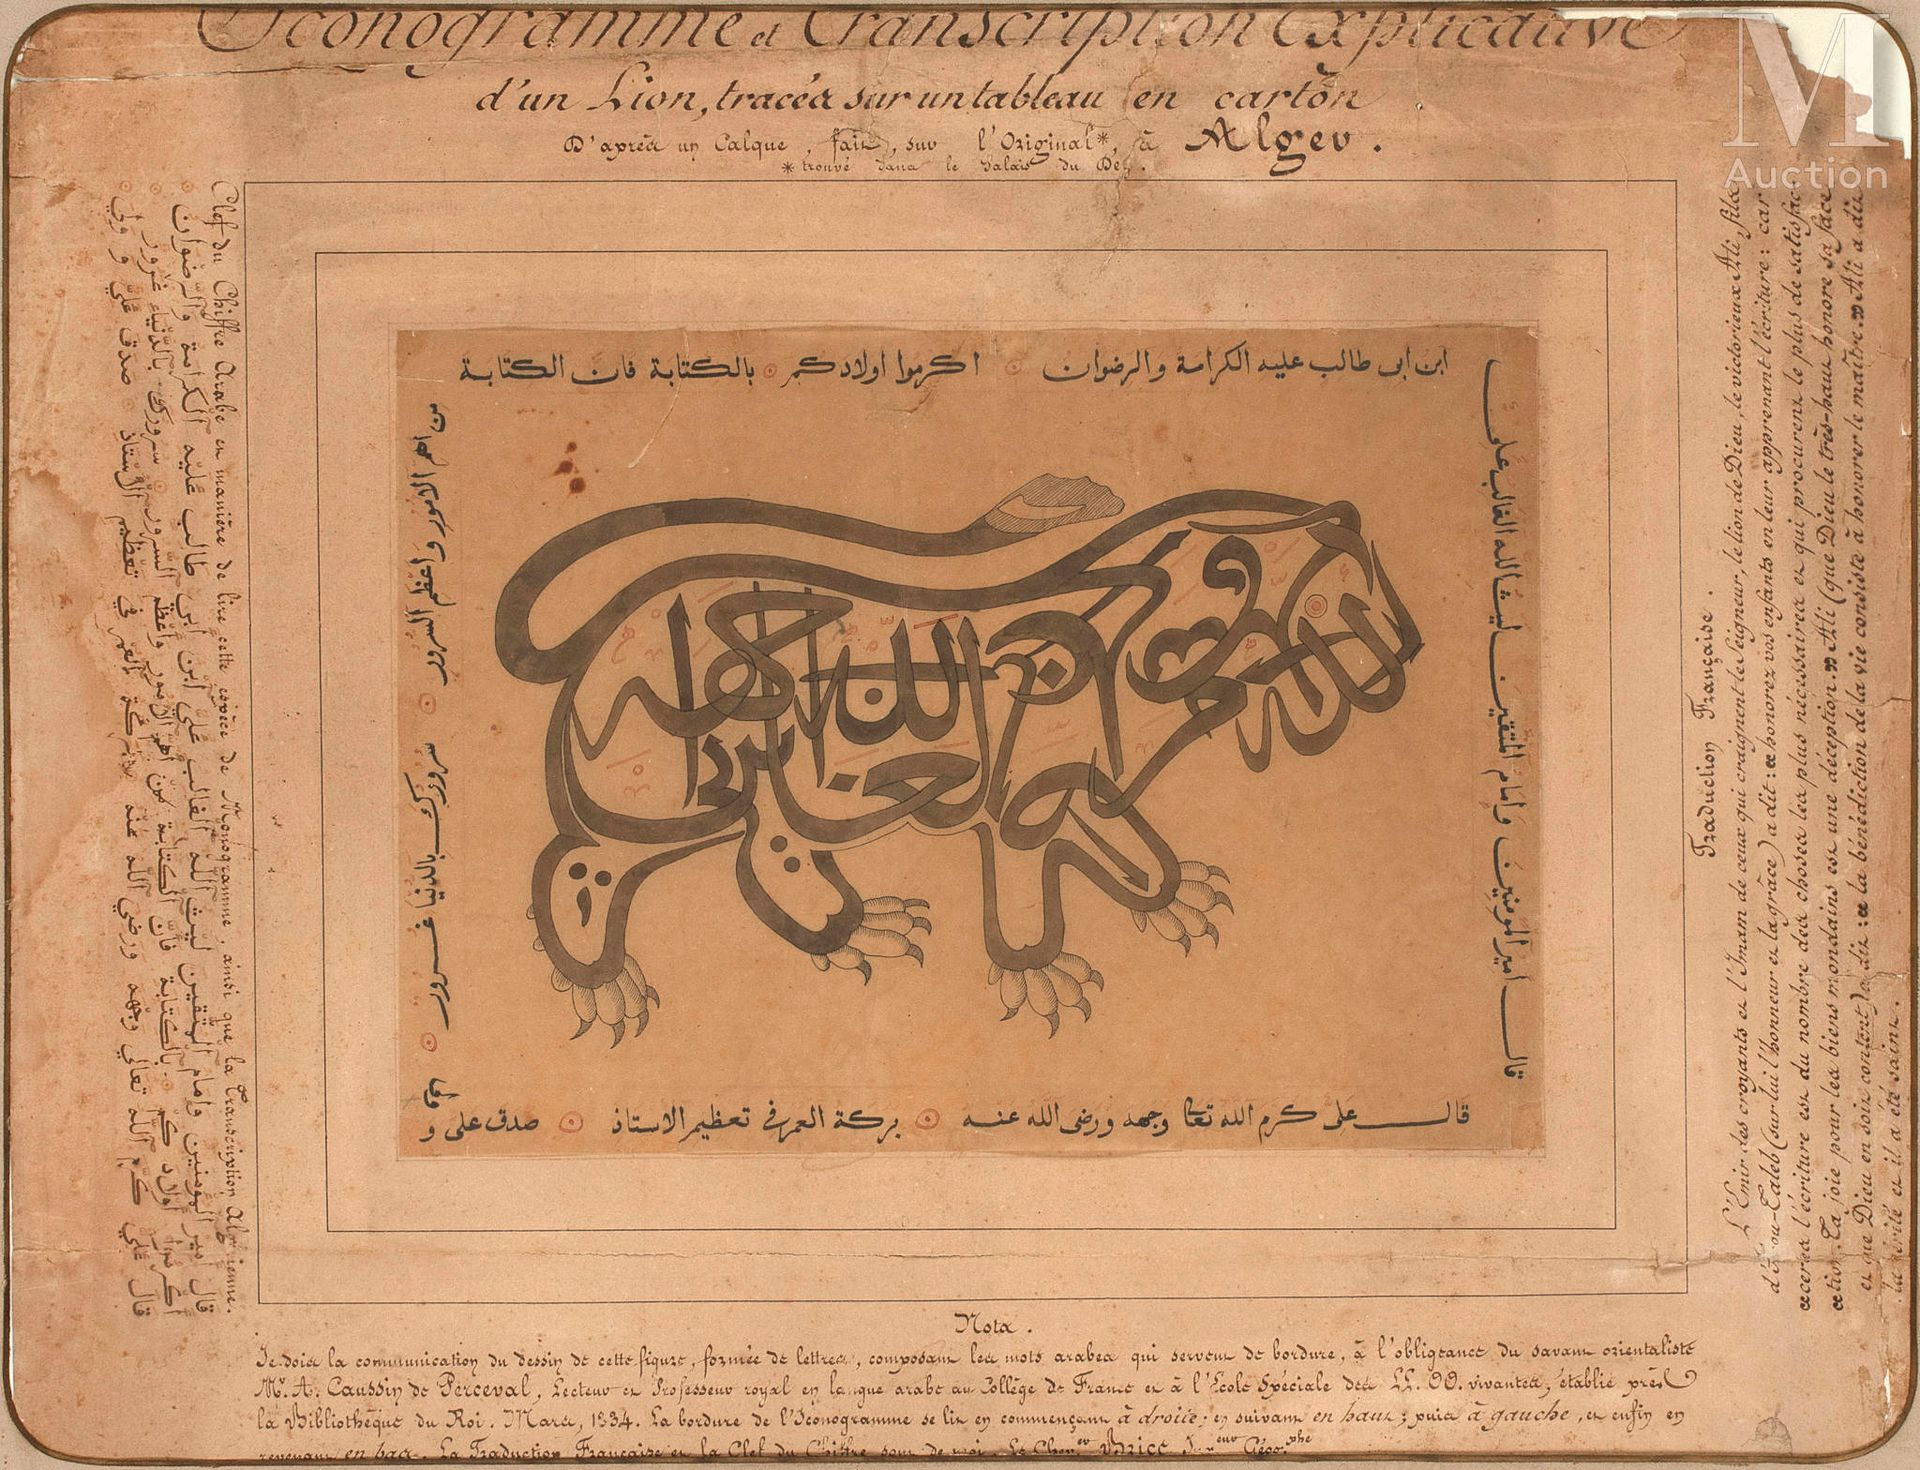 Calligraphie zoomorphe Algeria, 19th century
In the center, a lion drawn in Arab&hellip;